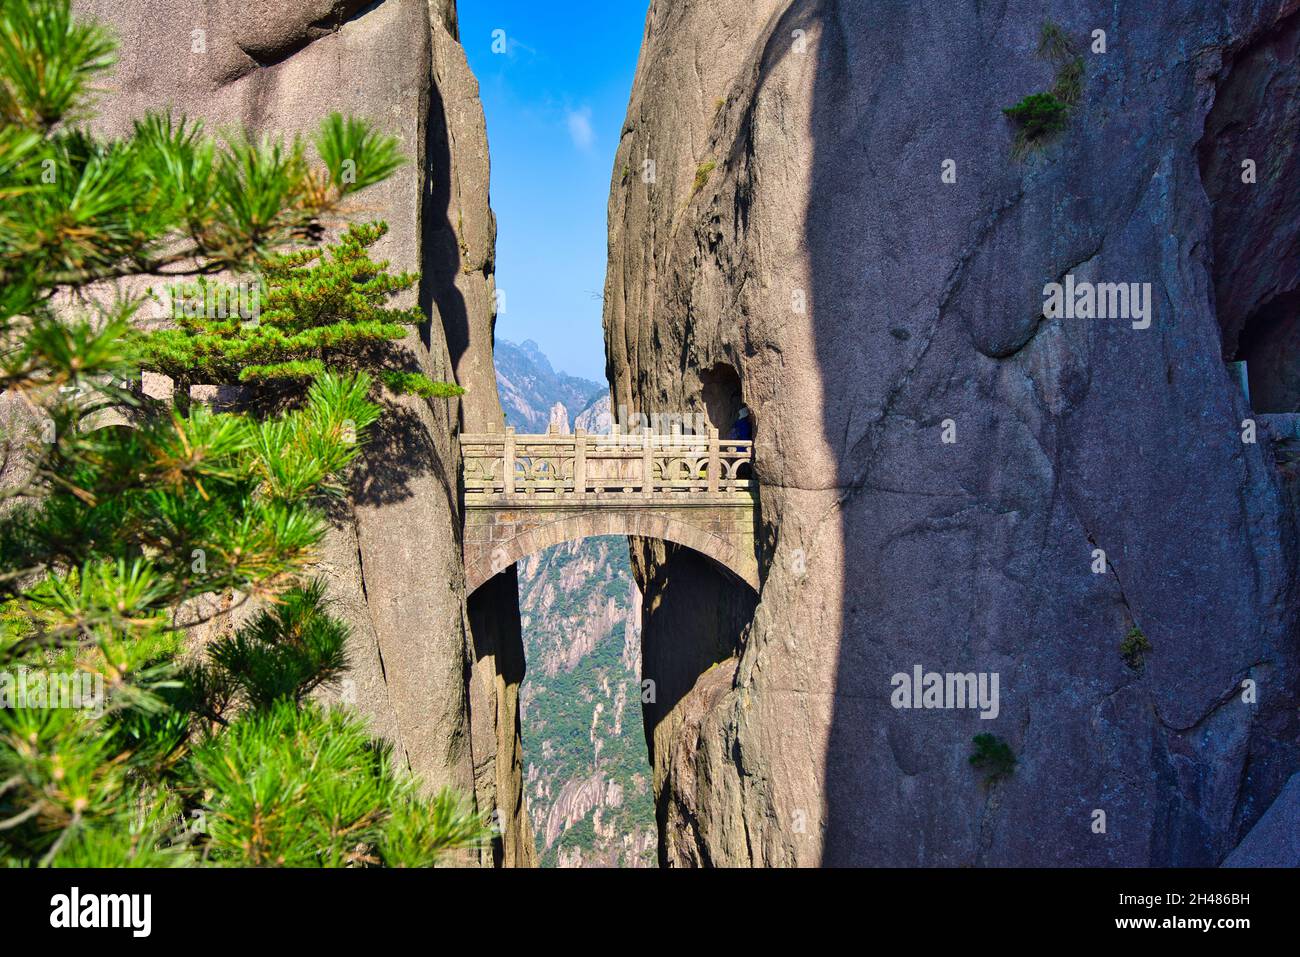 The bridge that connects the two do granite hills. Landscape of Mount Huangshan (Yellow Mountain). UNESCO World Heritage Site. Anhui Province, China. Stock Photo